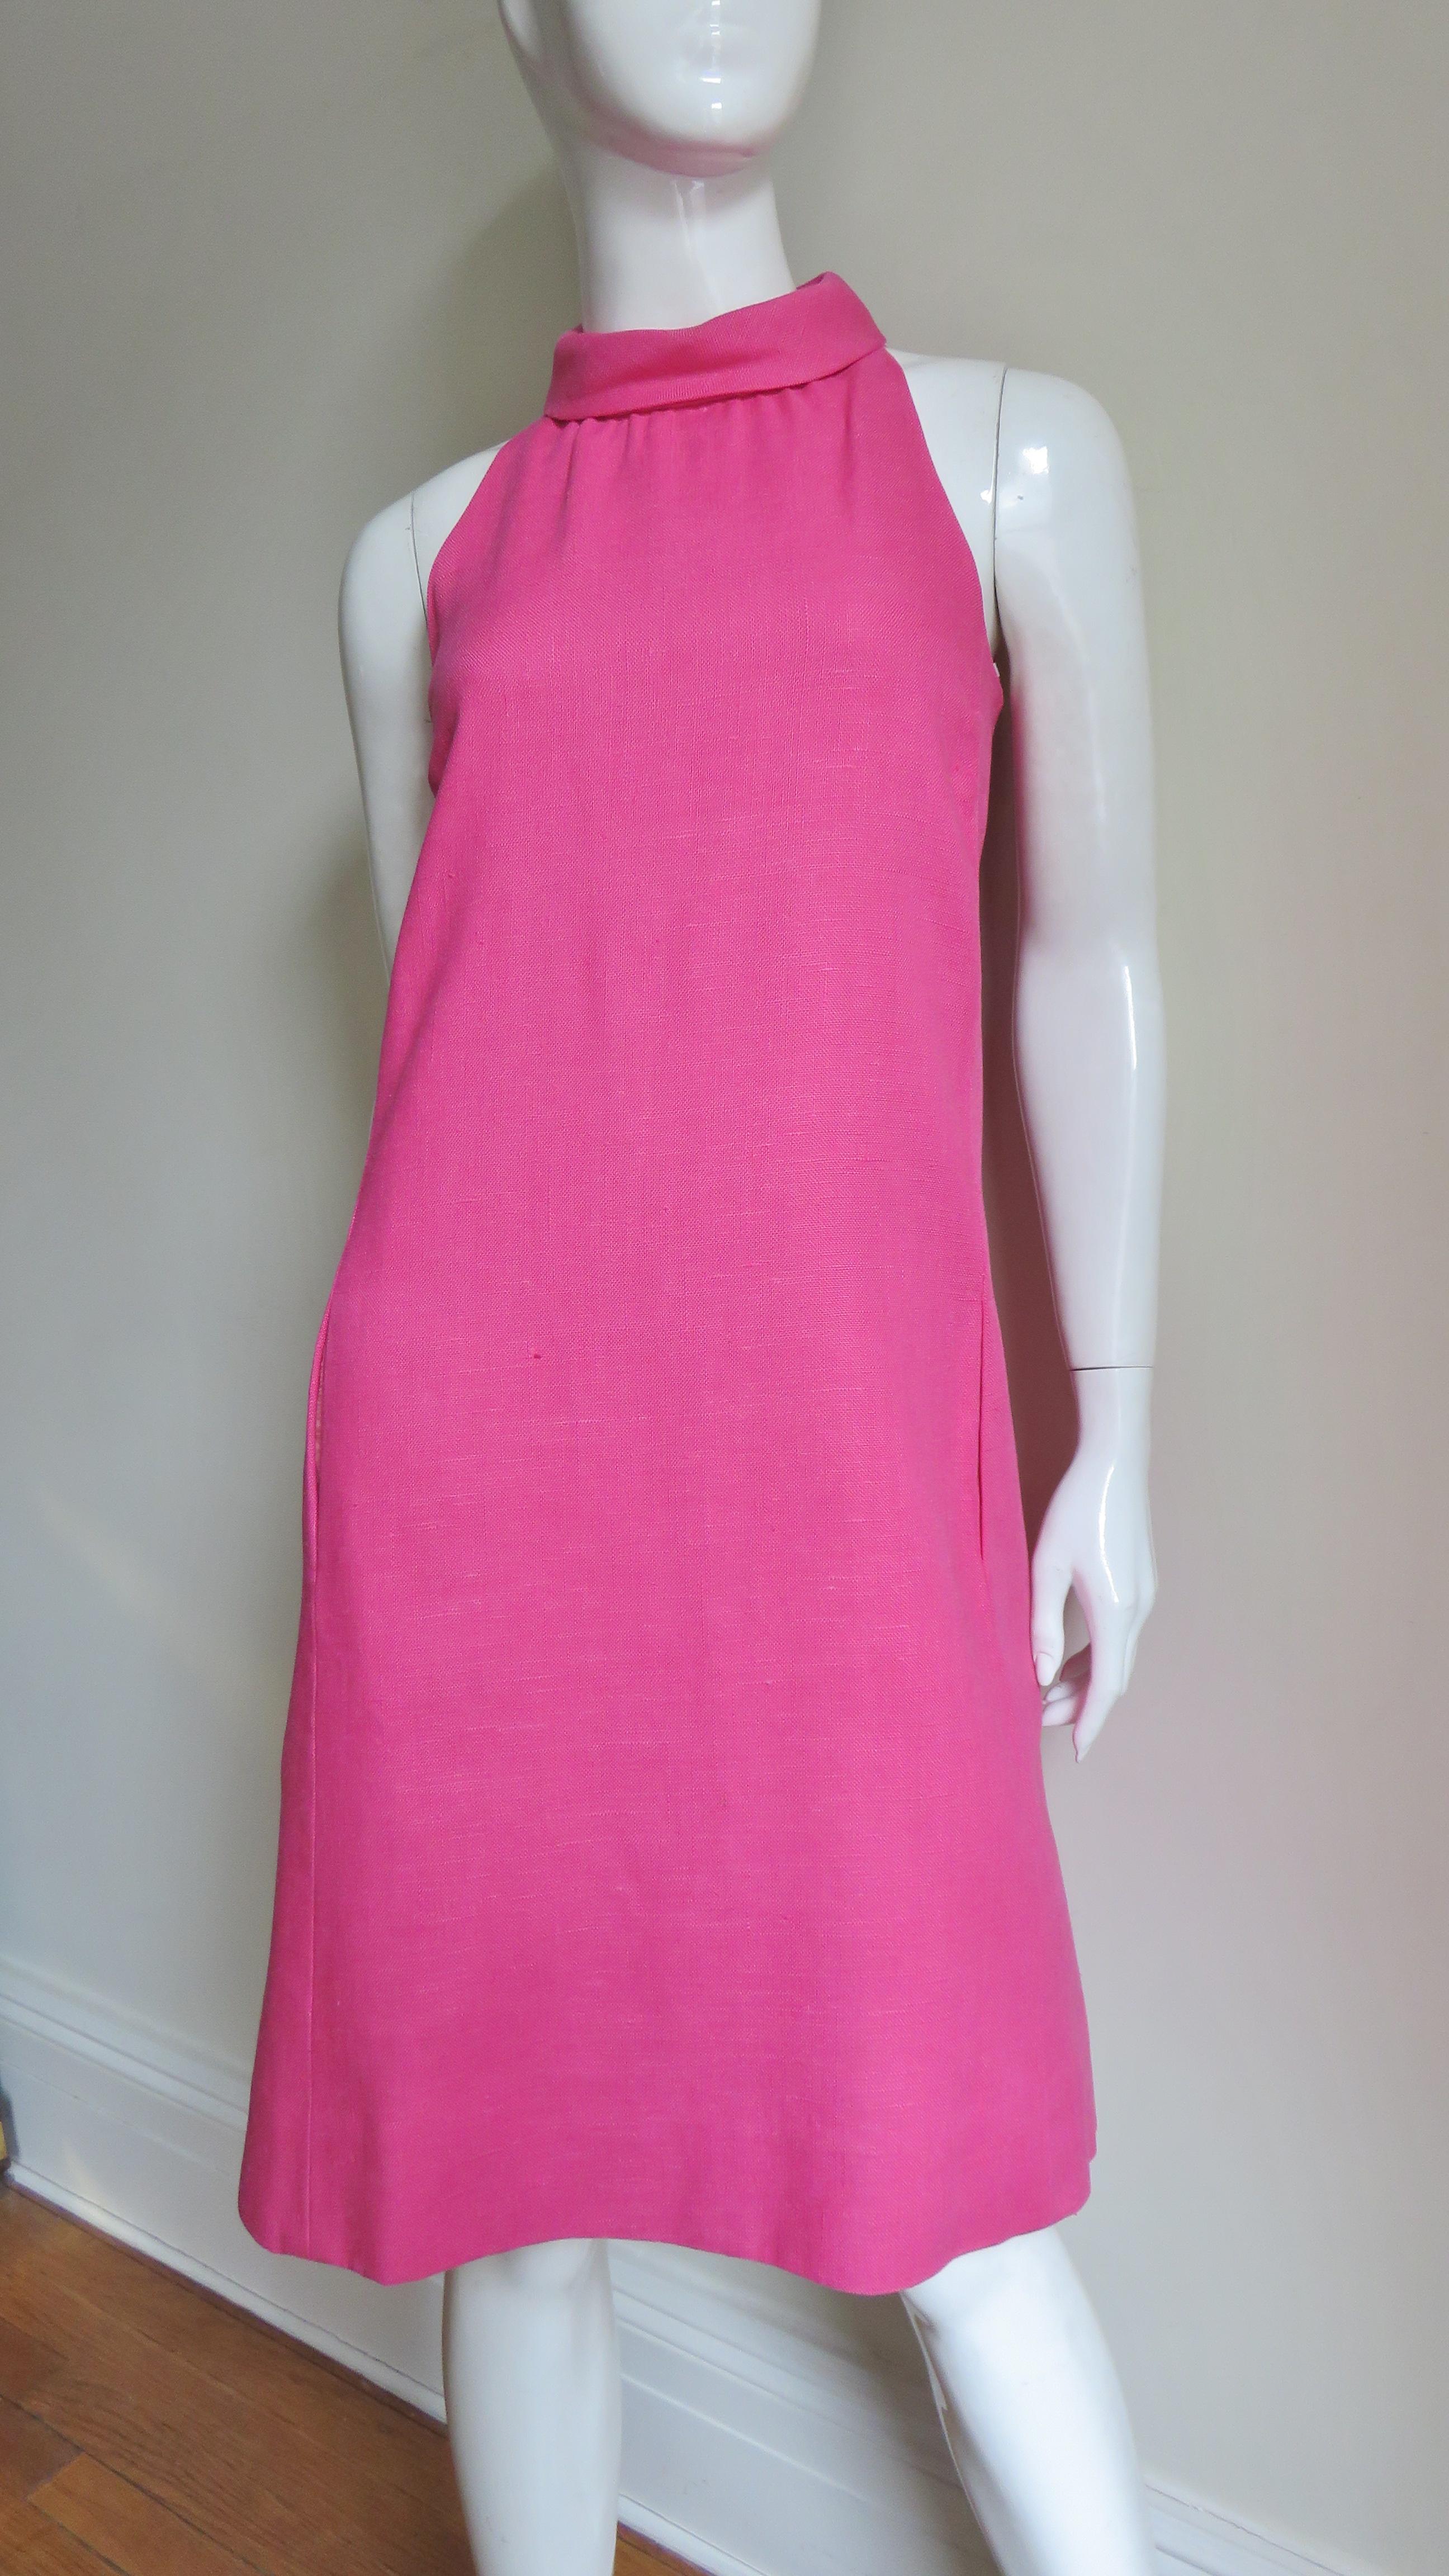 A great bight pink mid weight linen dress from B. H. Wragge (specifically the year 1967 as per the label). It is sleeveless with a rolled collar and it flares subtly to the hem.  The back has a large oval cutout and closes with 3 self covered